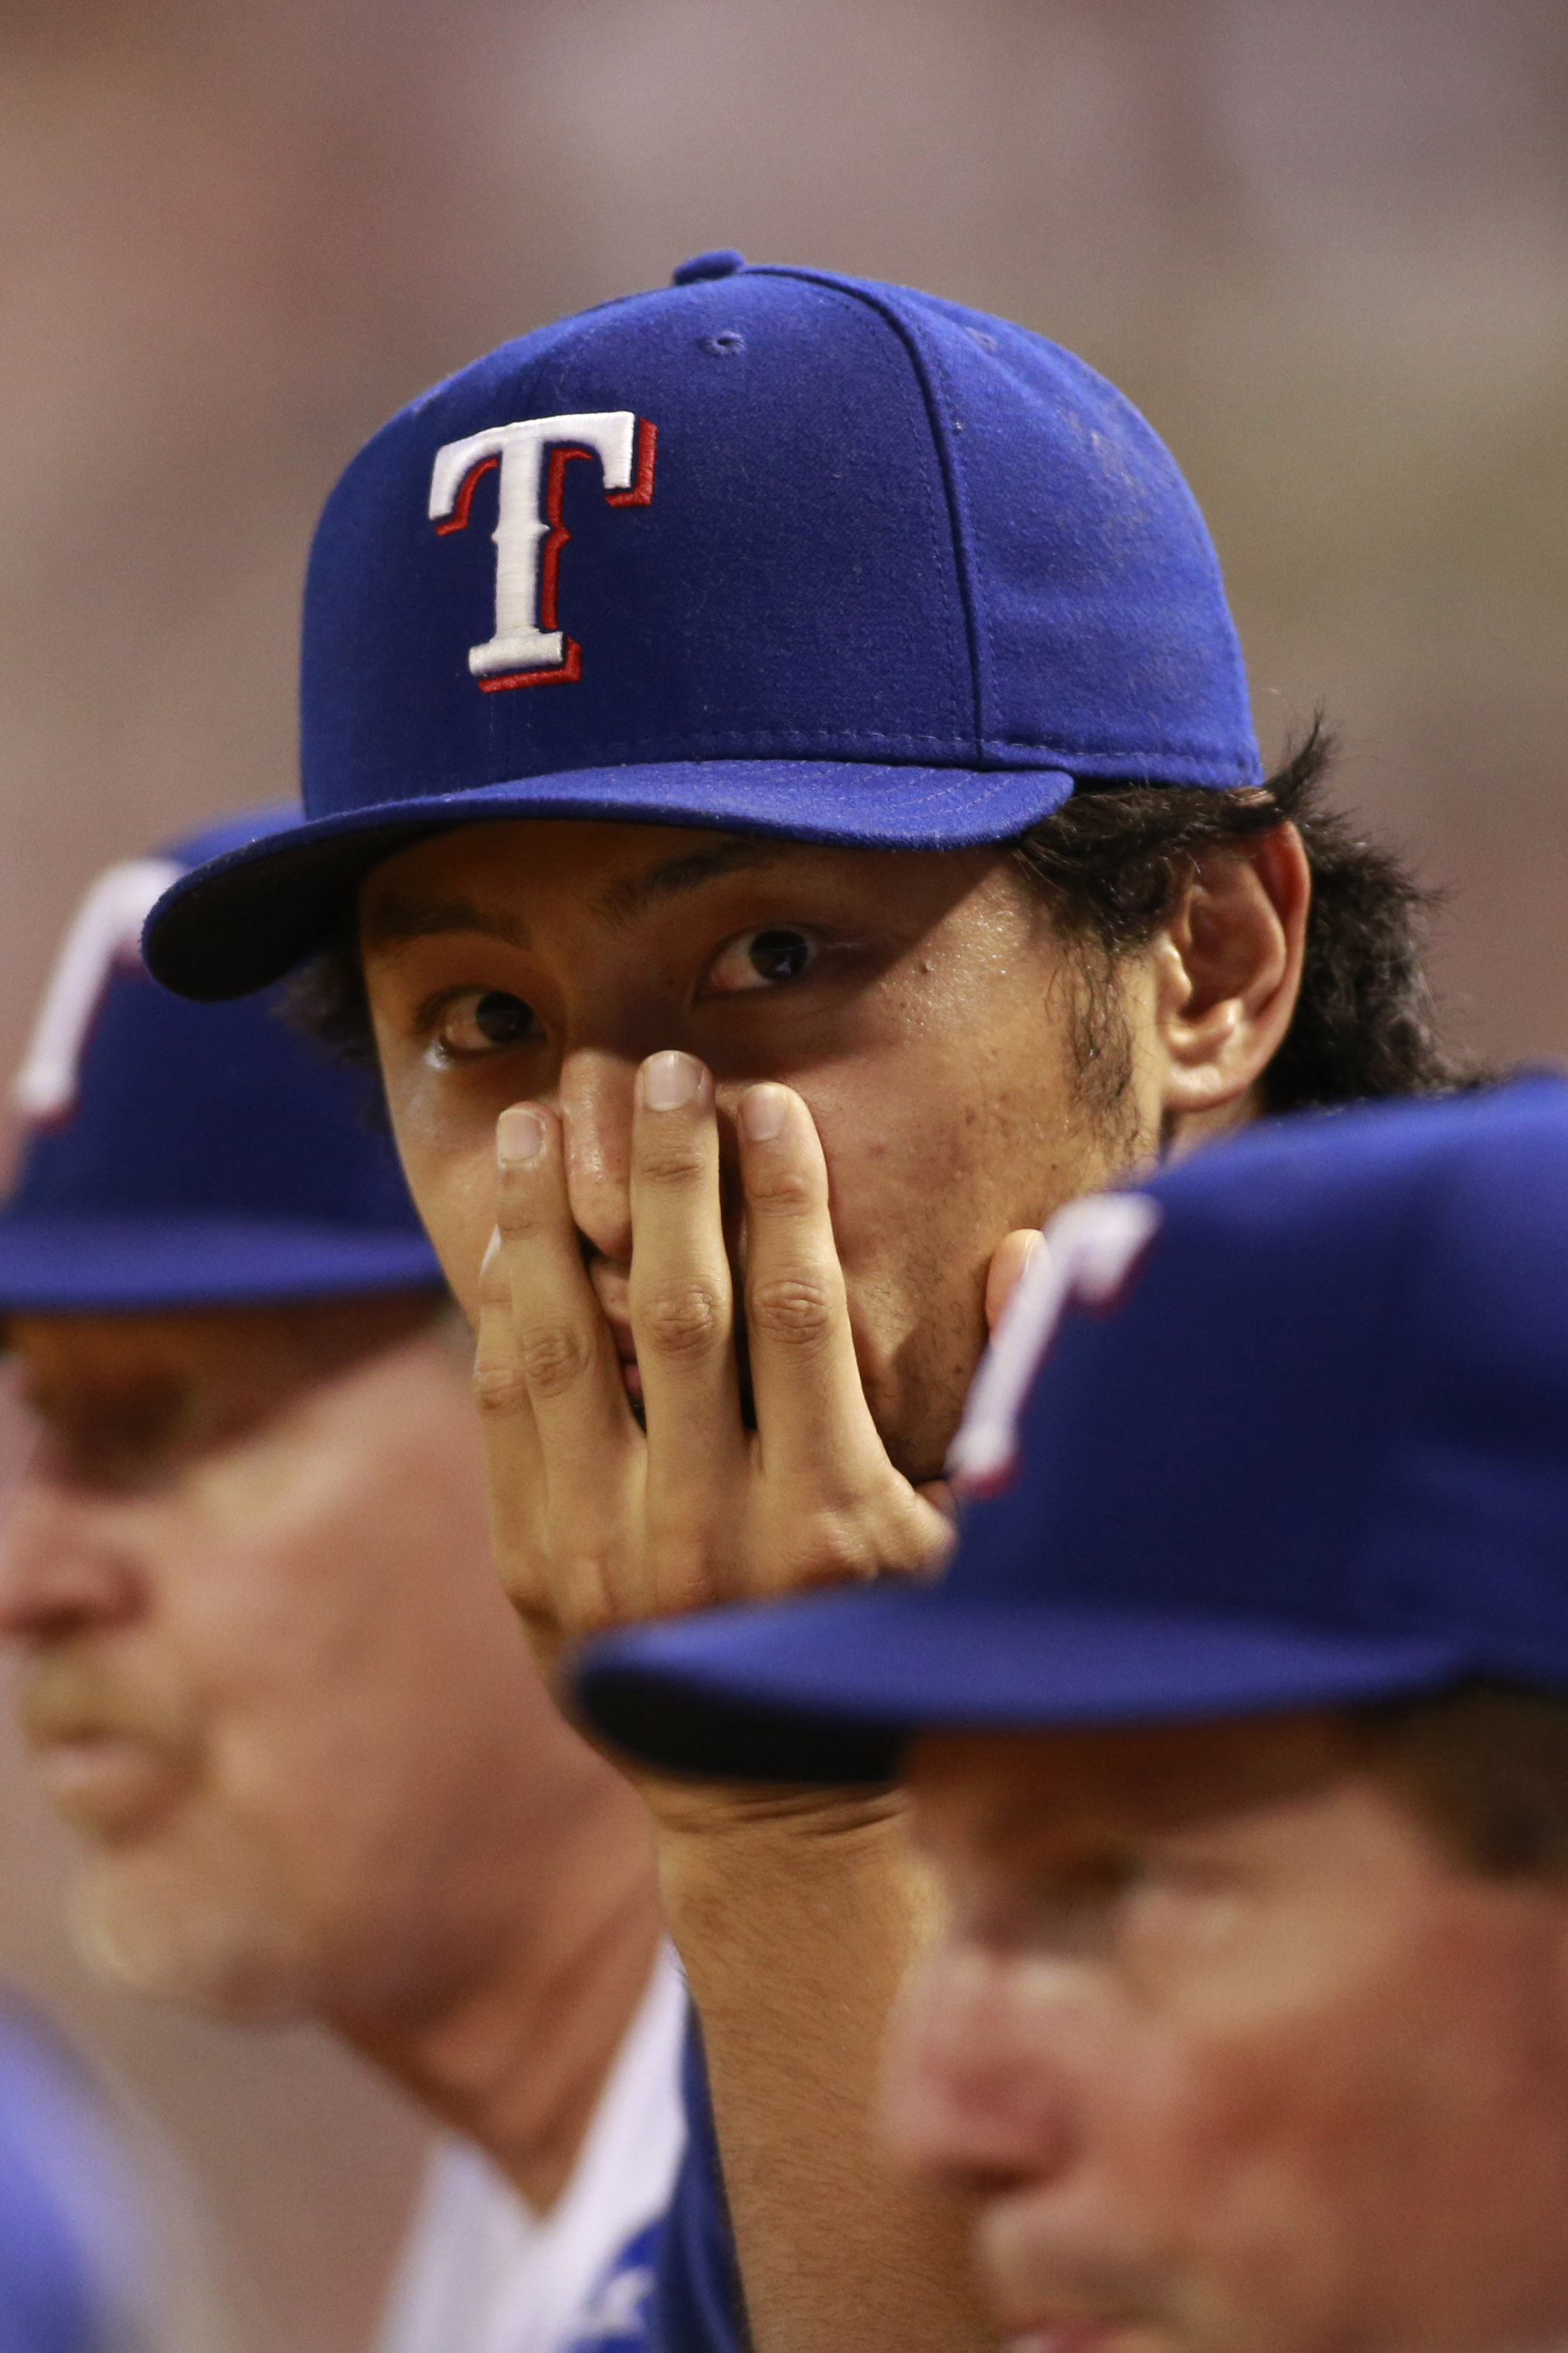 I can't blame Yu for not wanting to look. It wasn't pretty last year in Arlington.